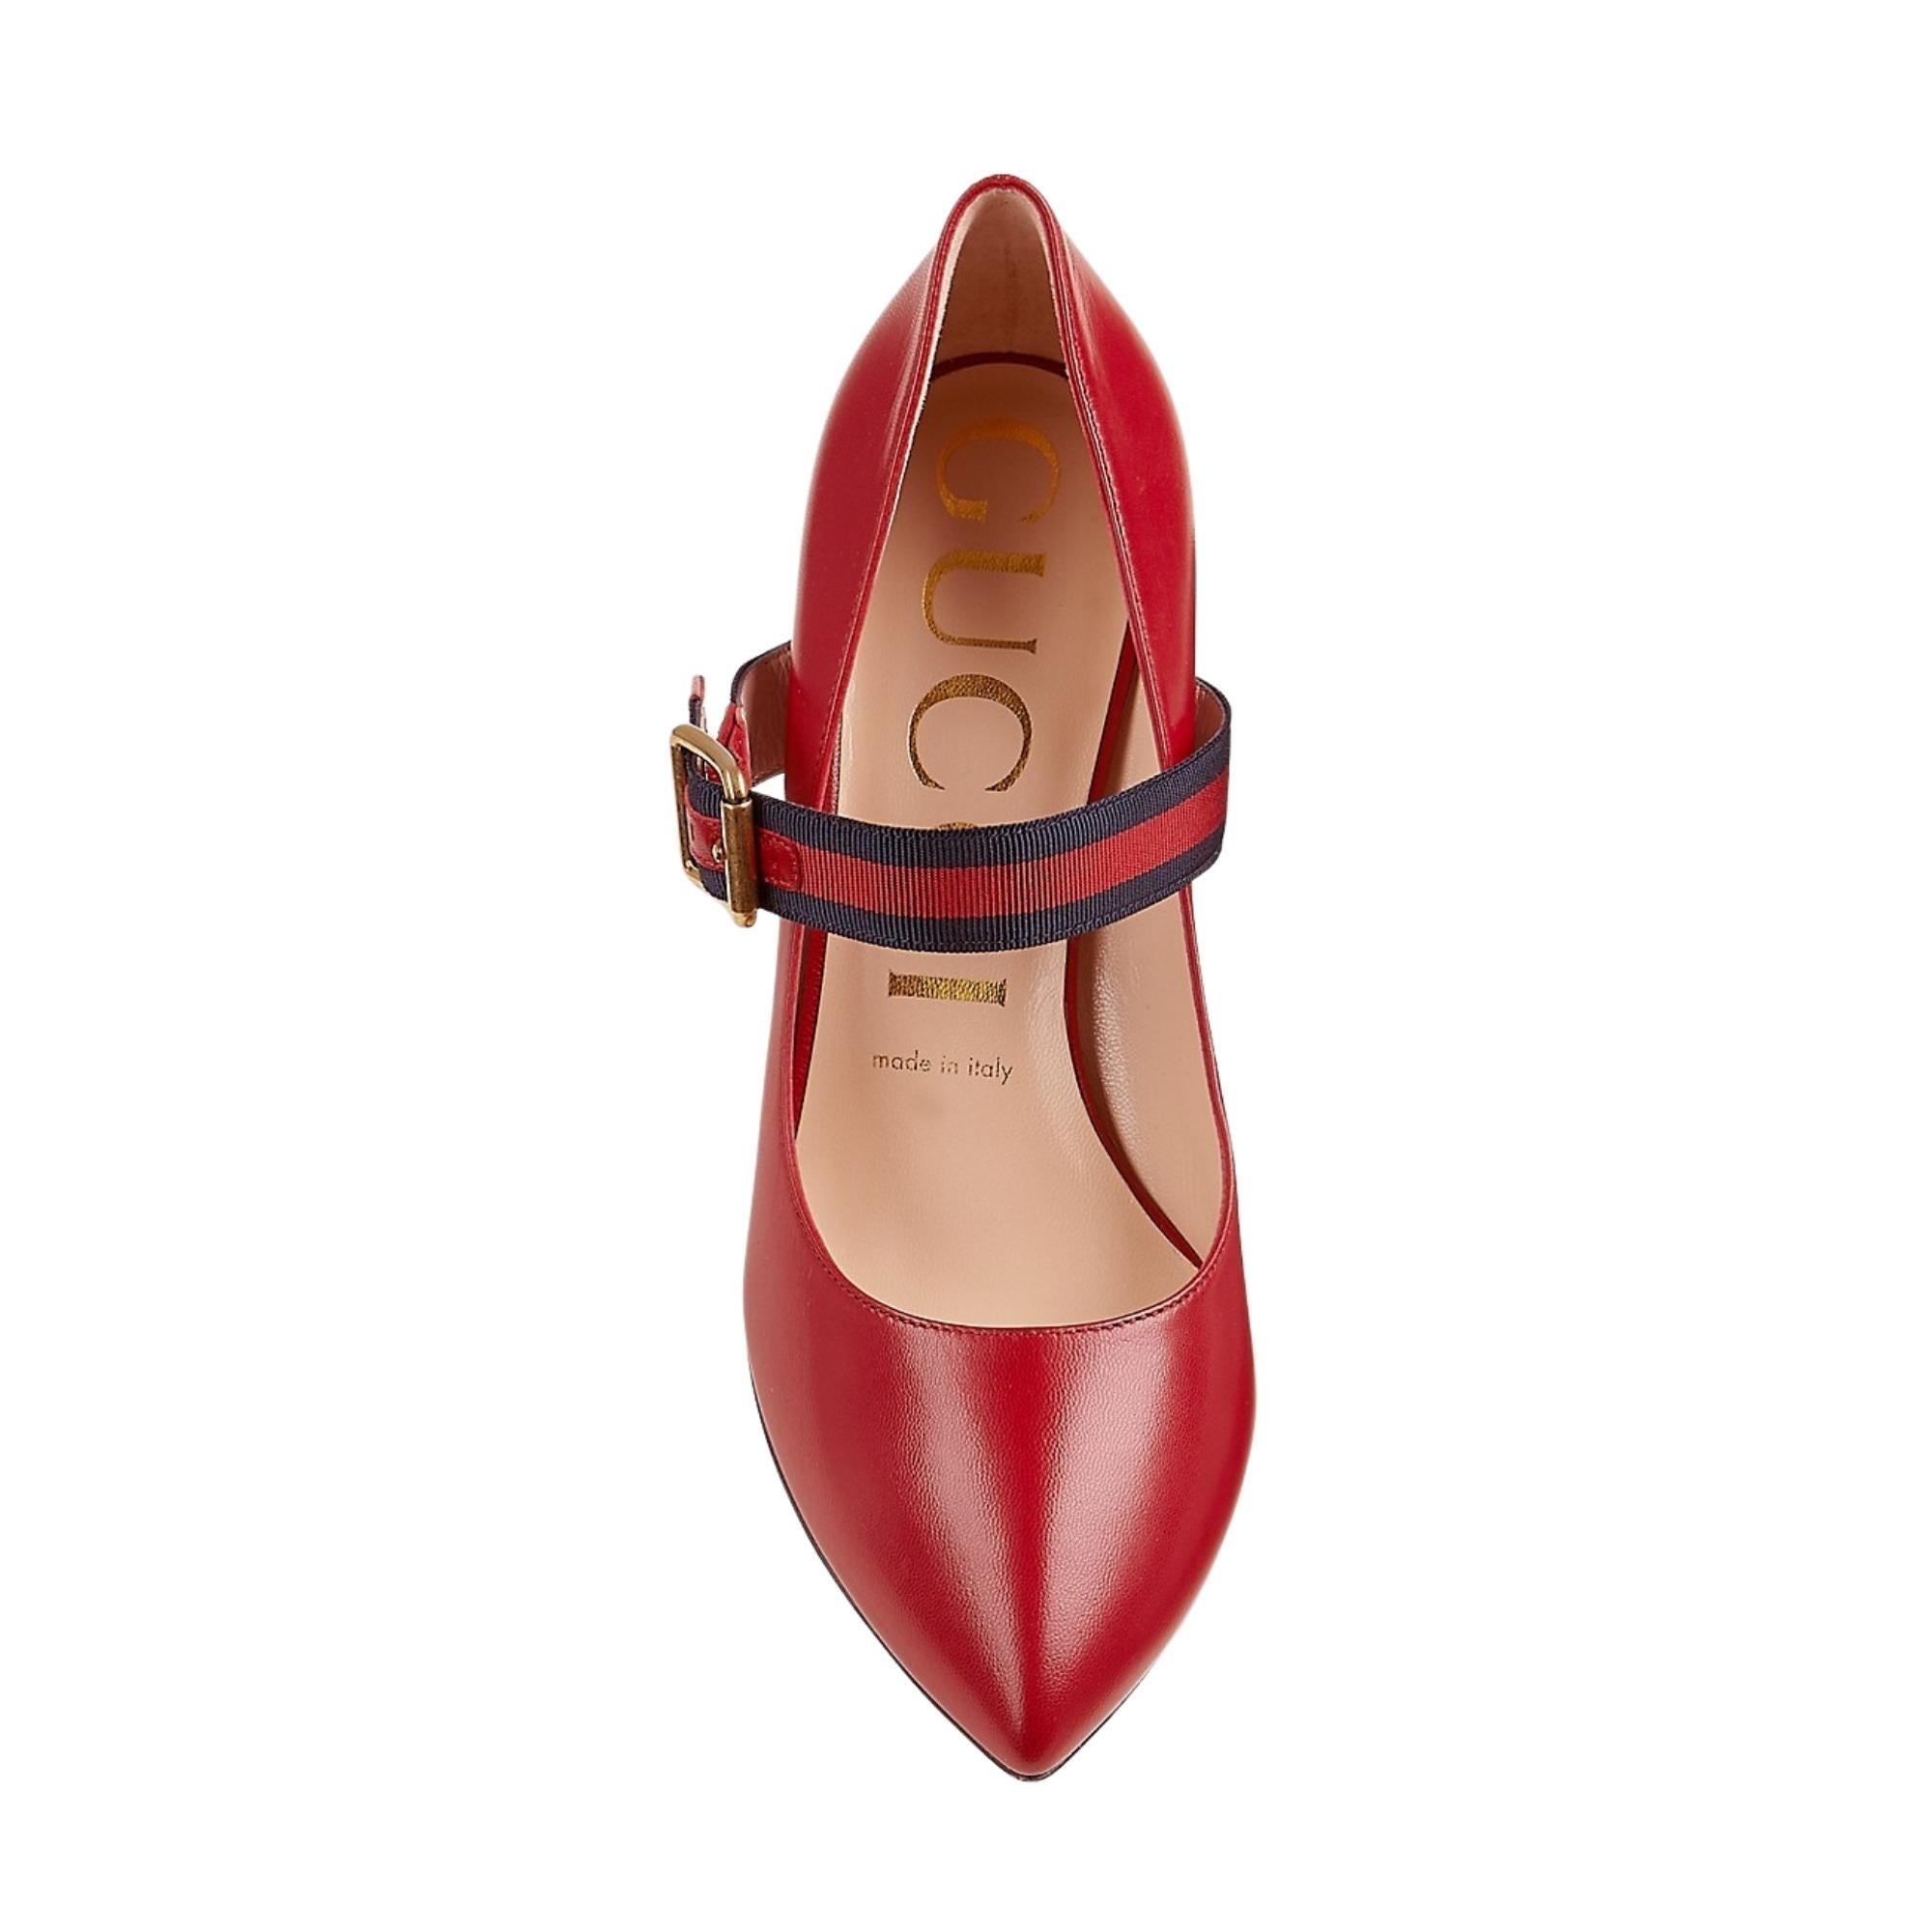 These pumps are made of leather and feature a grosgrain/web strap, a pointed toe, a 3 inch heel, gold tone hardware, an adjustable ankle strap and leather lining and sole.

COLOR: Red
MATERIAL: Leather
SIZE: 35.5 EU / 4 US
ITEM CODE: 475086 35.5